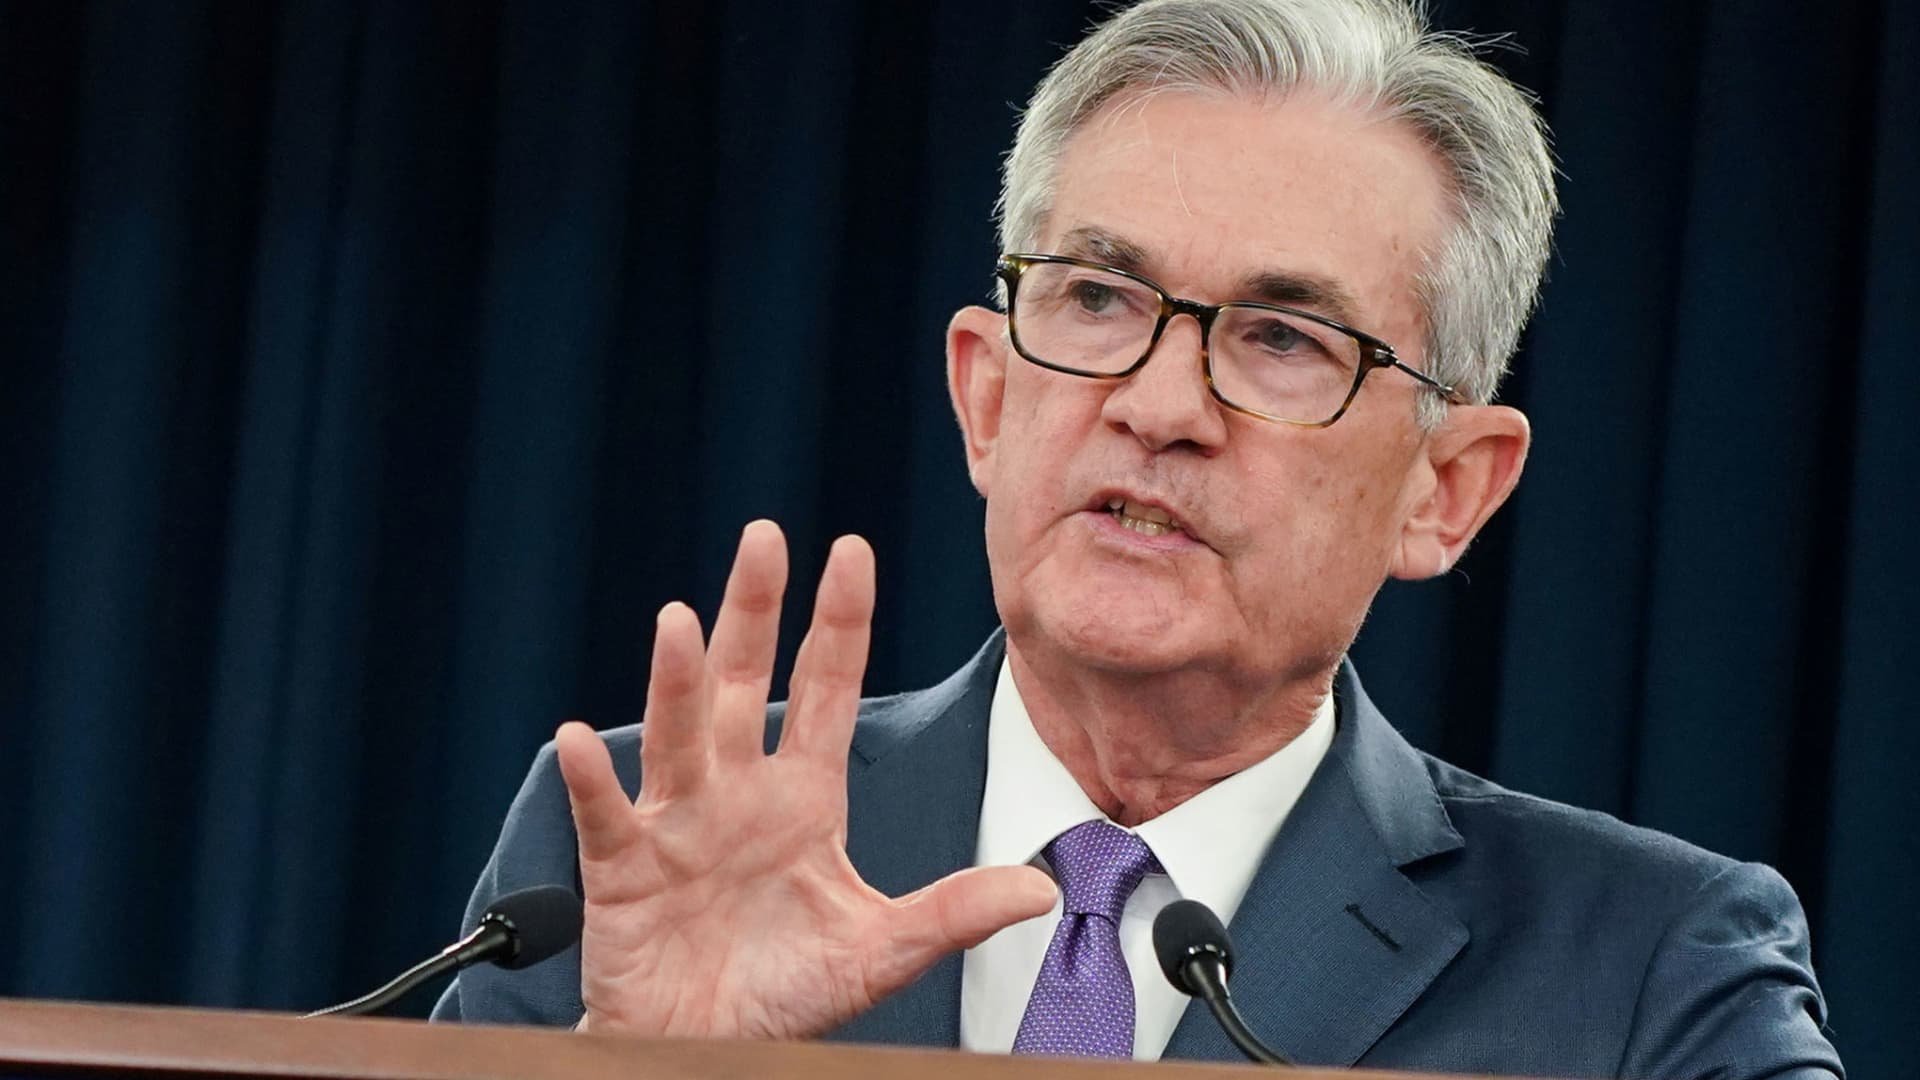 Fed Chair Powell says it's 'very, very unlikely' the U.S. will see 1970s-style inflation